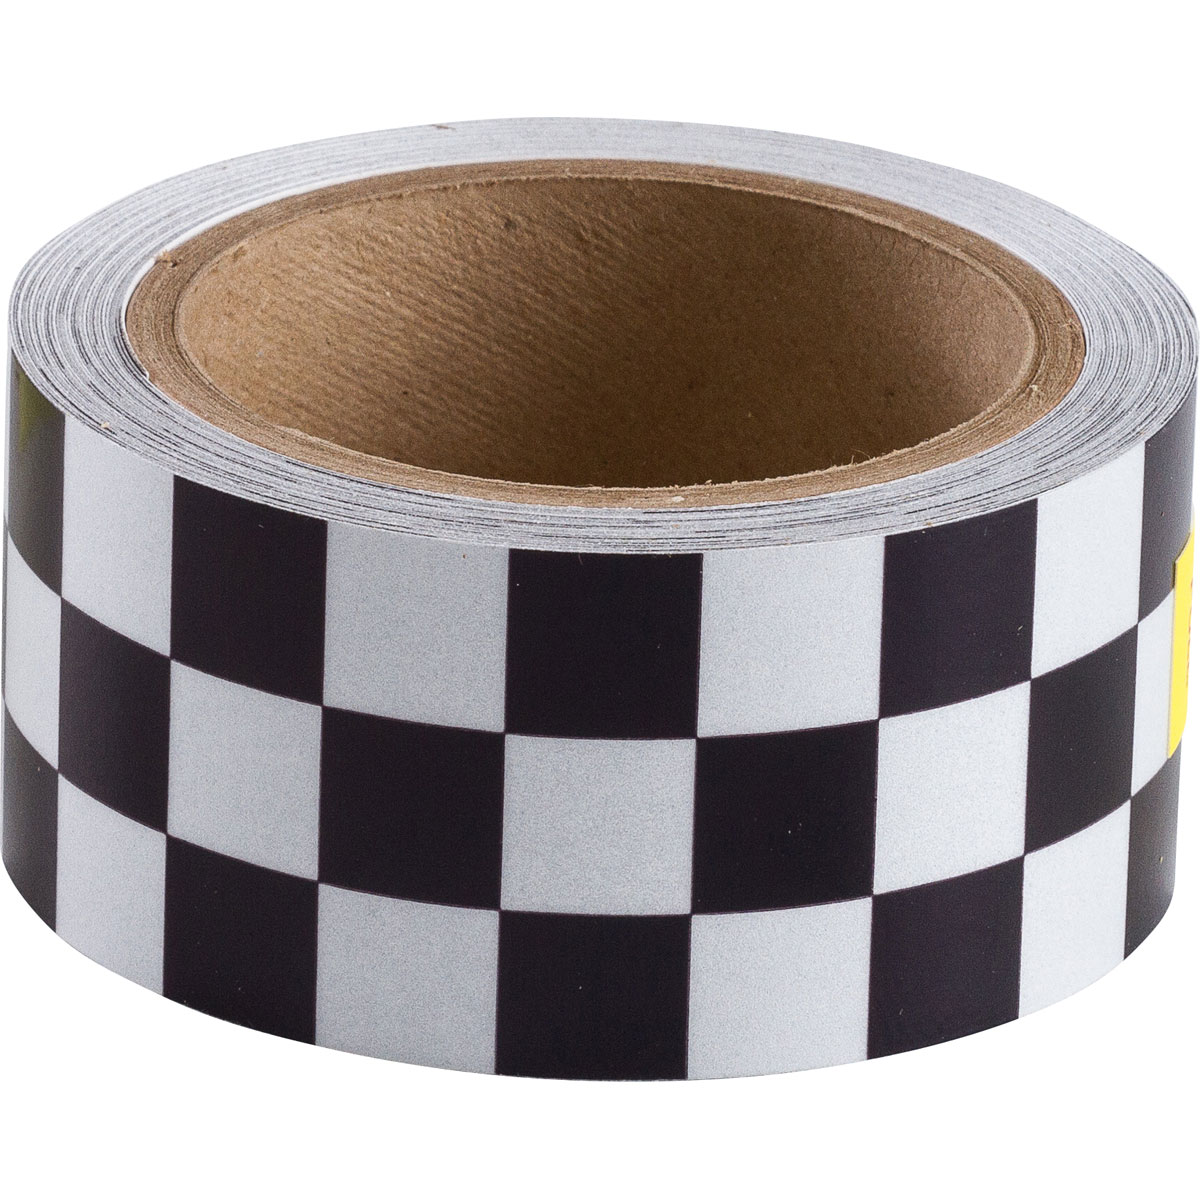 High Intensity Chequer Chequered Reflective Tape Vinyl Self-Adhesive Safety Tape 